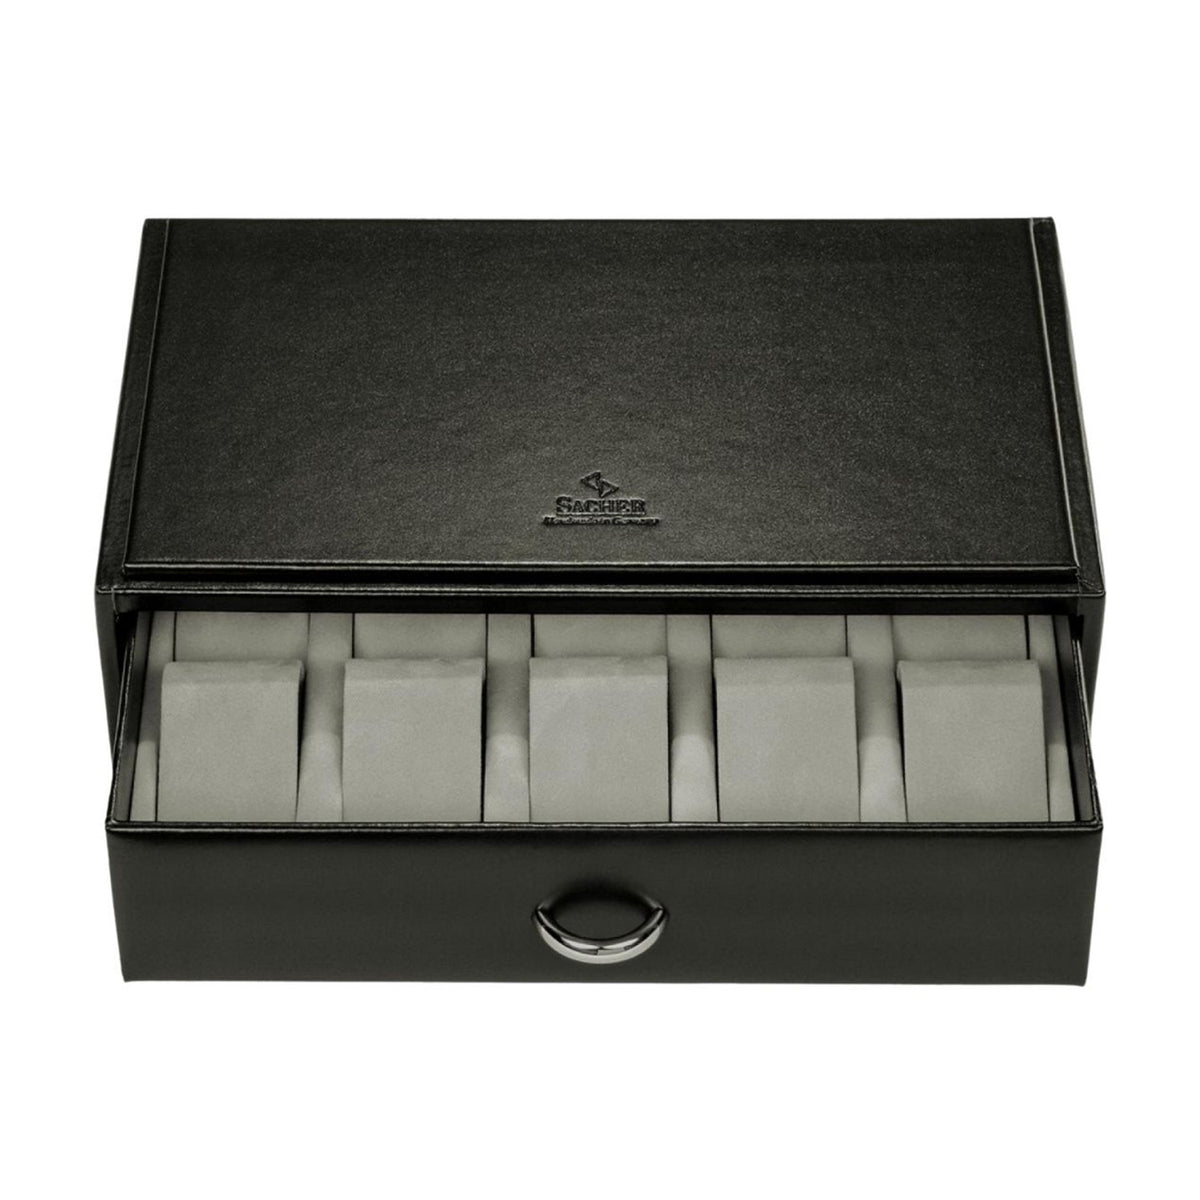 Watch case for 10 watches | Black | Italian leather | for collectors